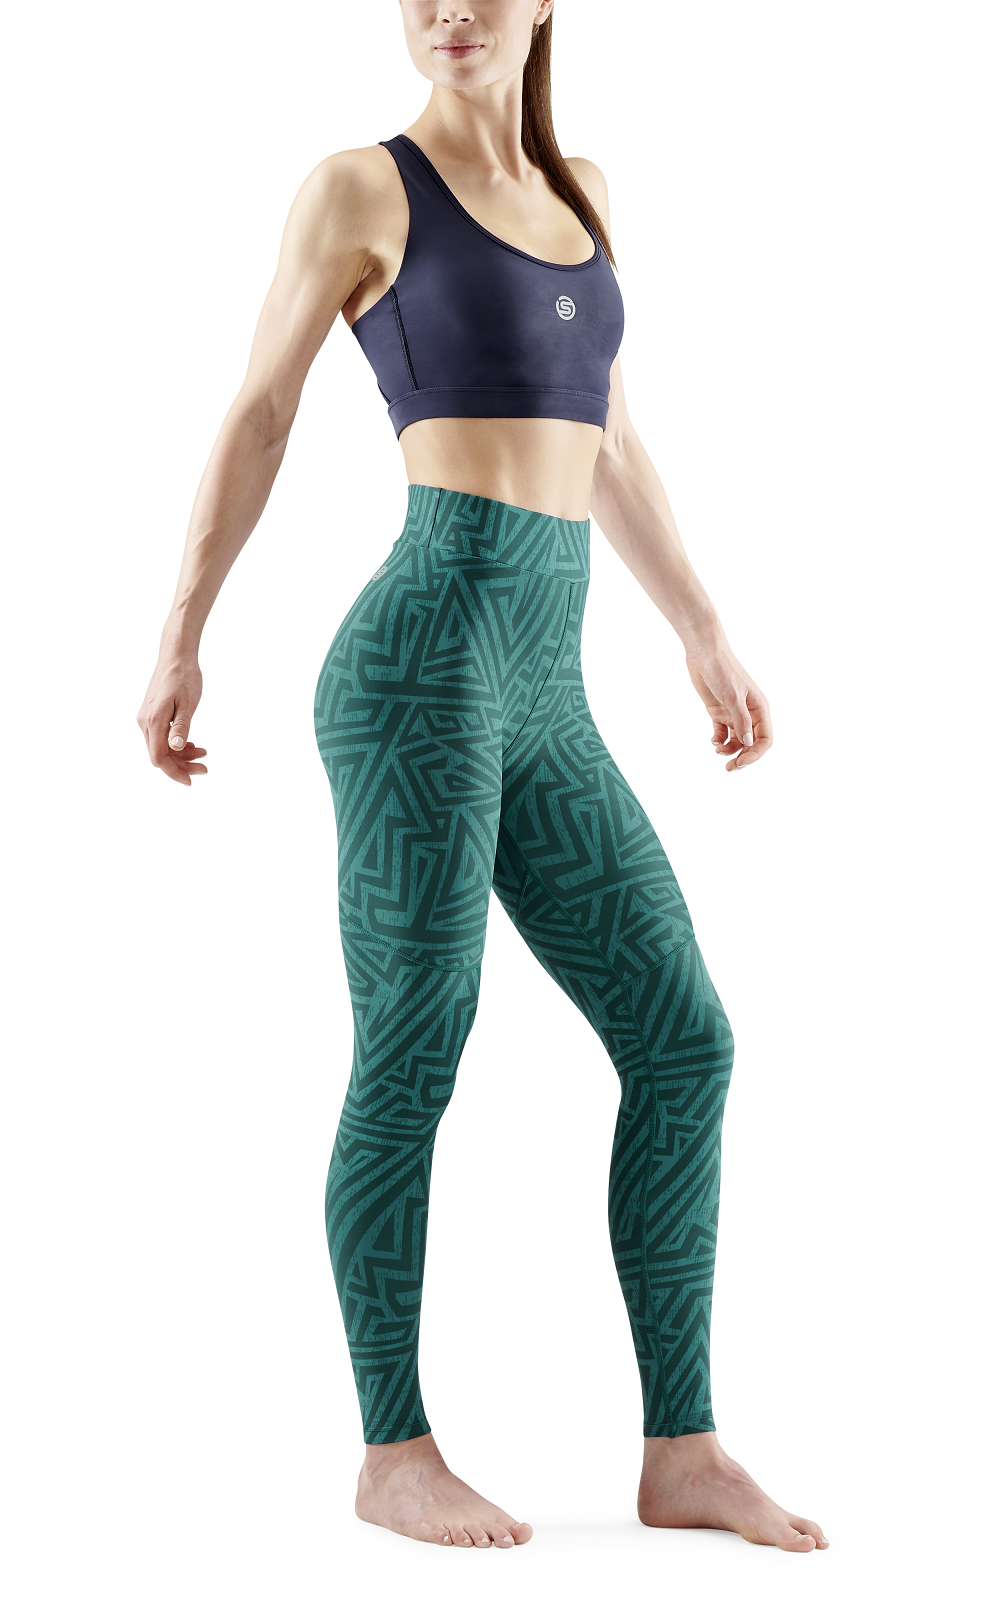 SKINS Women's Compression Soft Long Tights 3-Series - Lt. Teal Angle